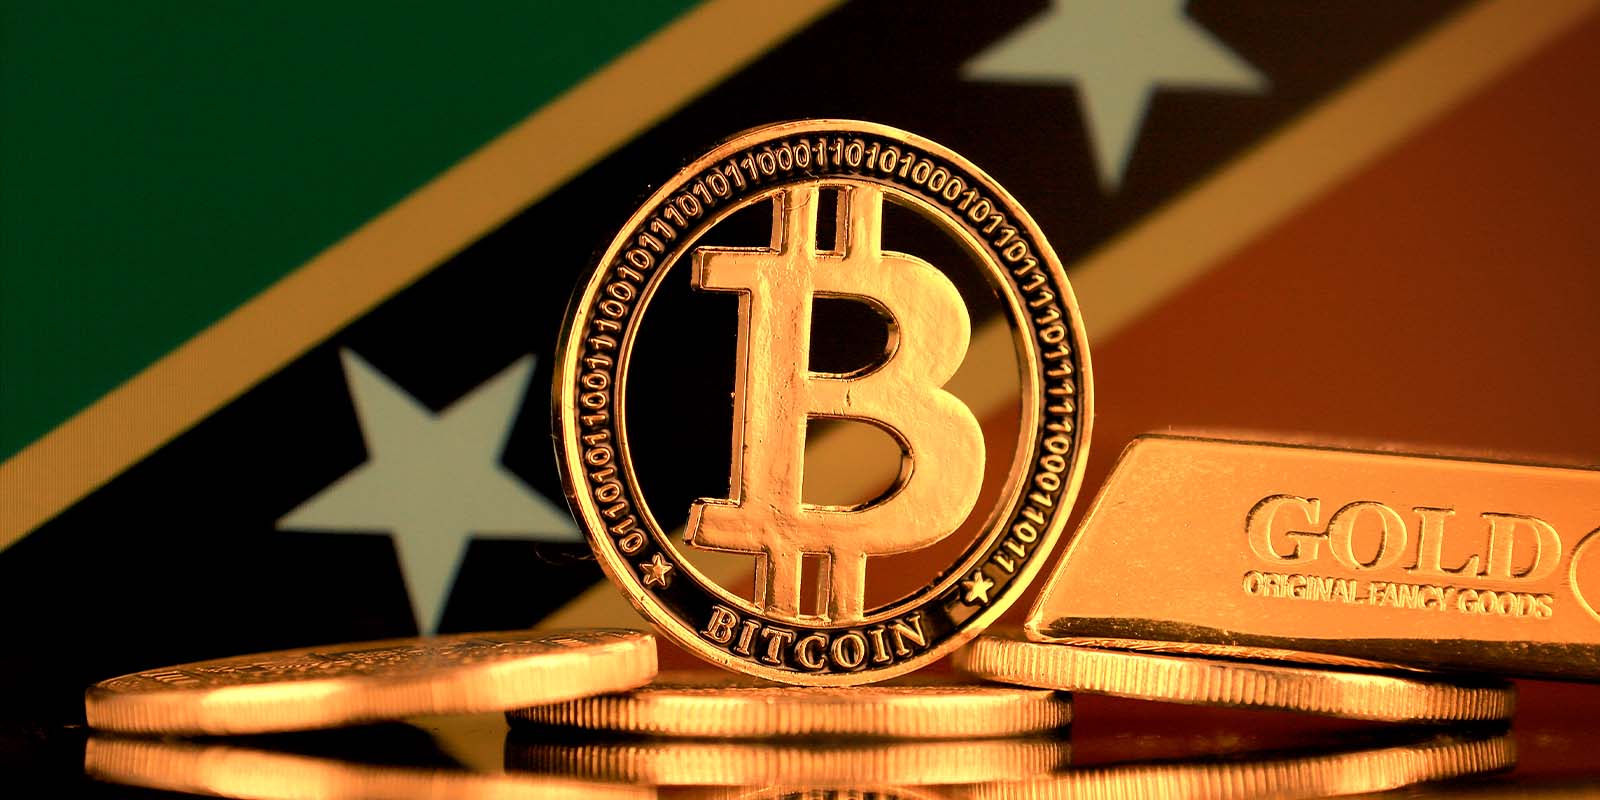 St Kitts & Nevis is a crypto-friendly country